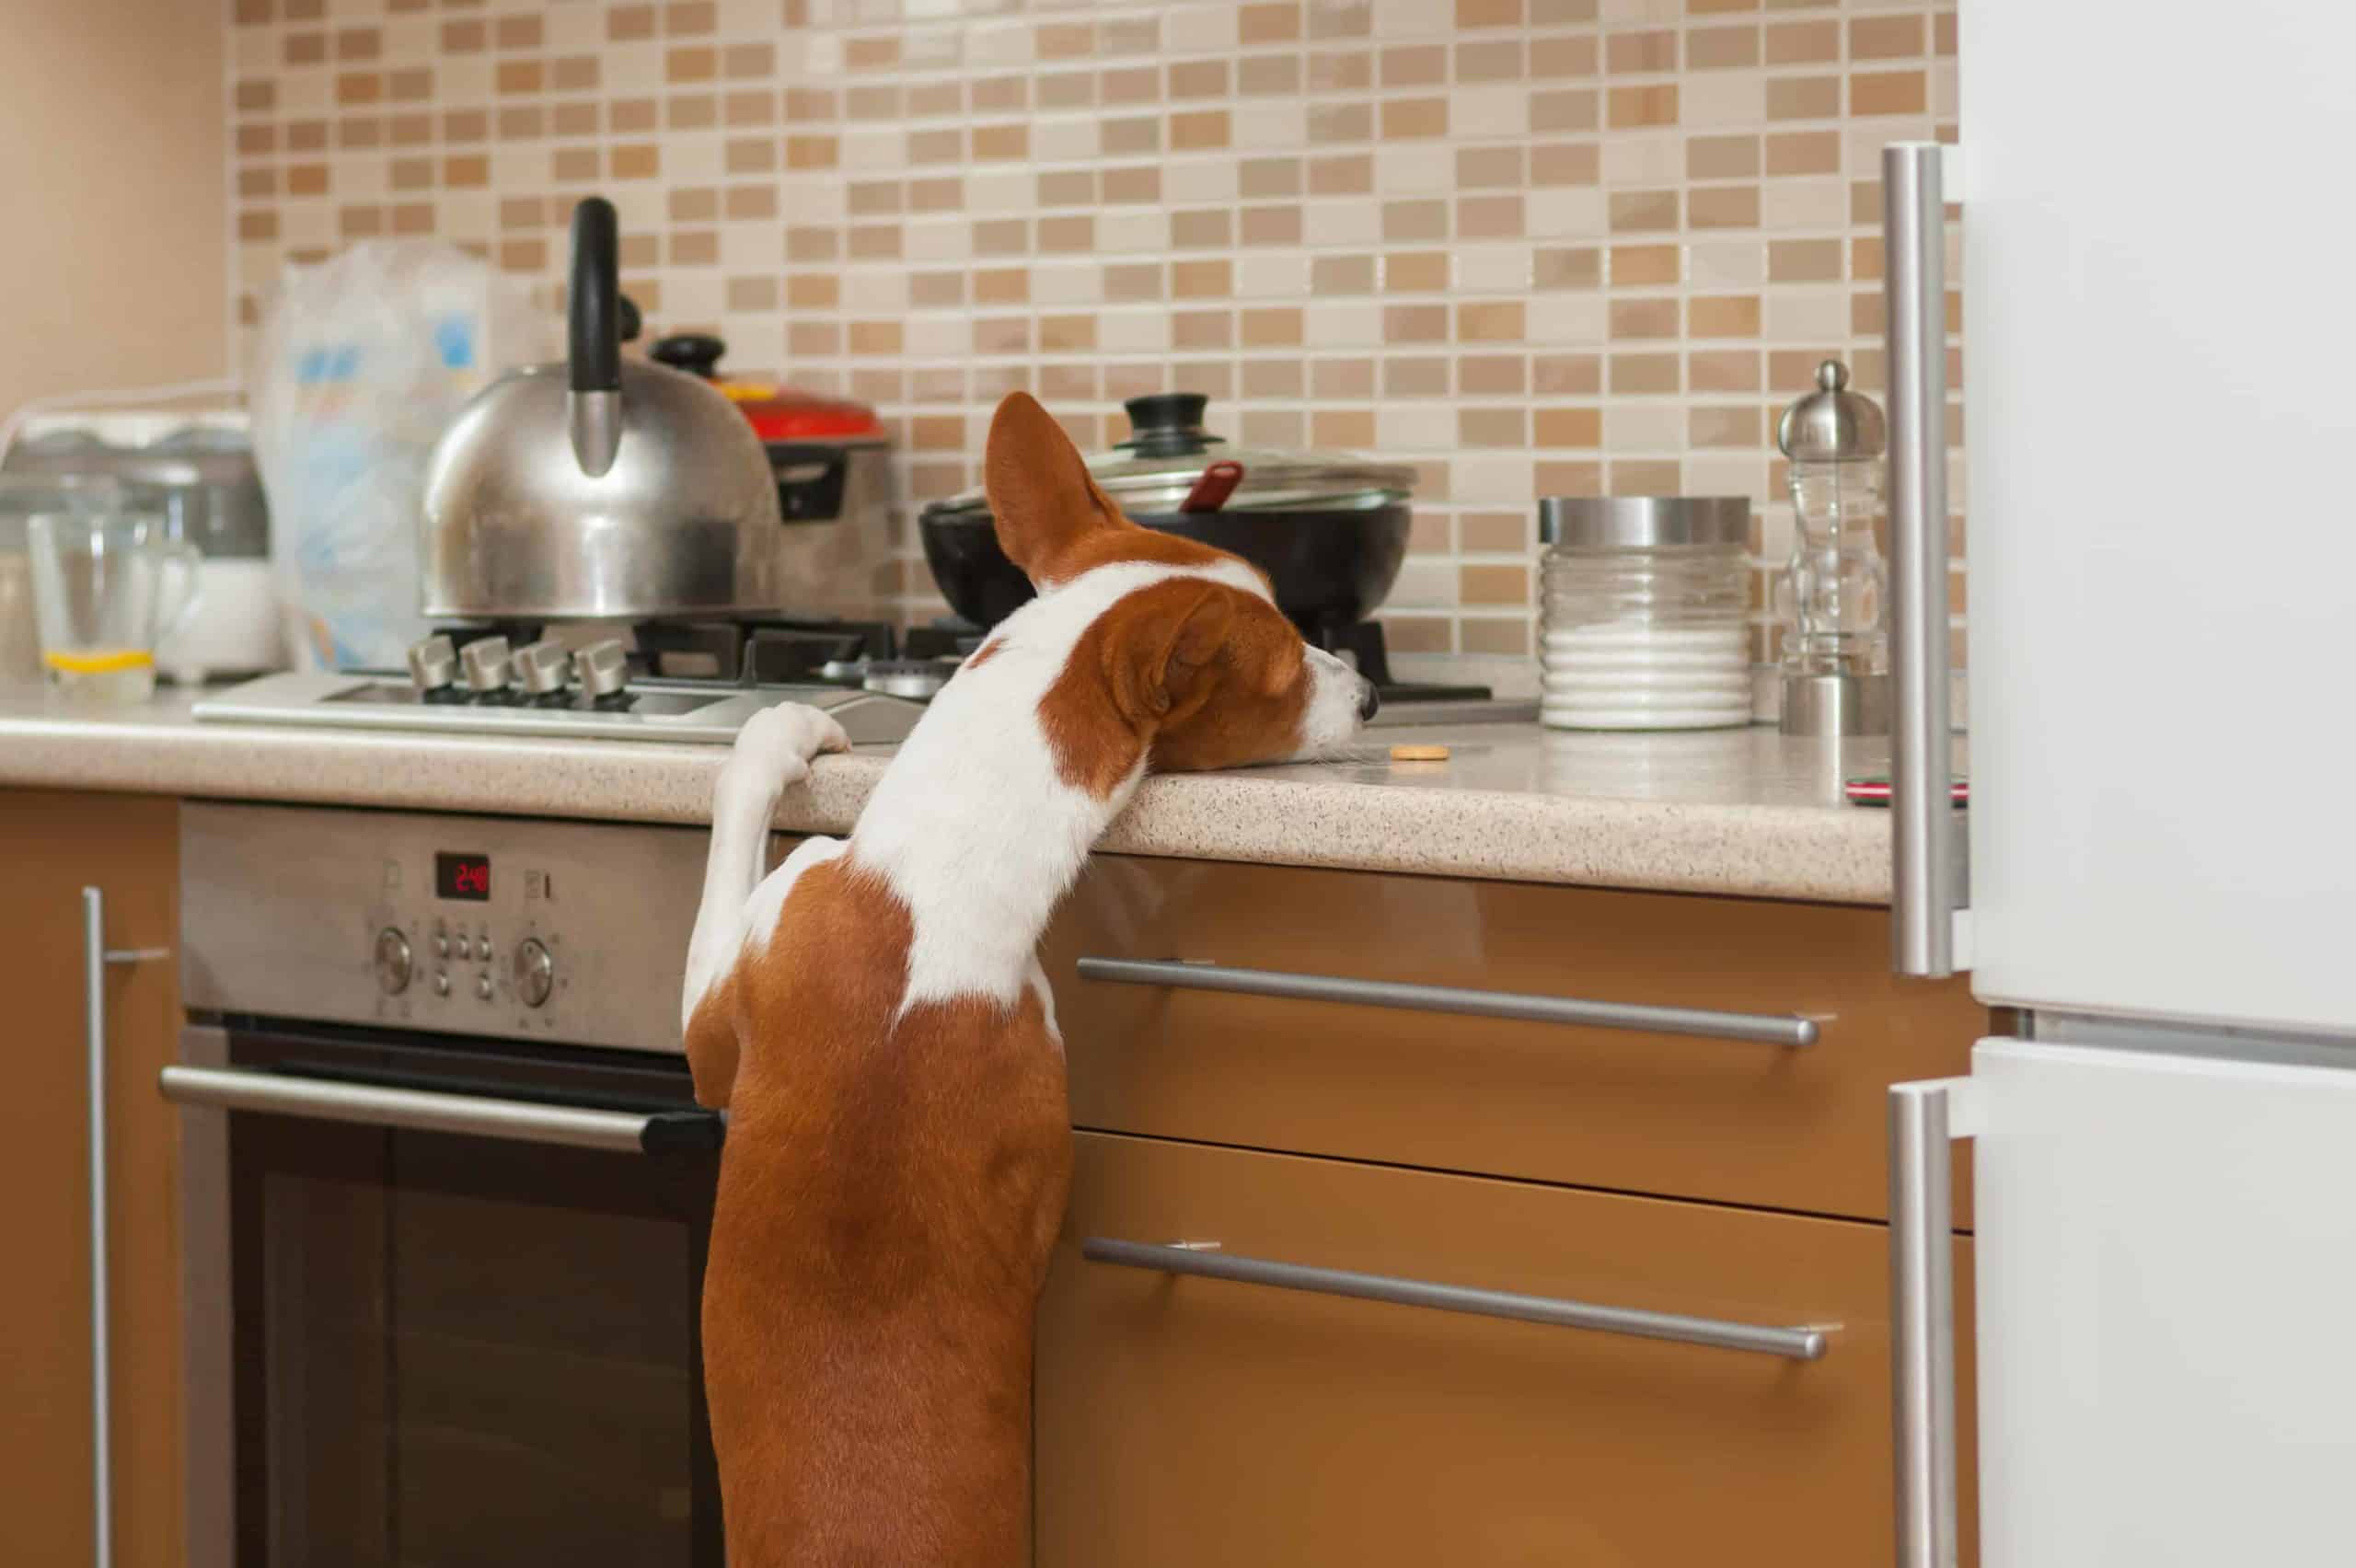 Basenji tries to steal food from kitchen counter. 